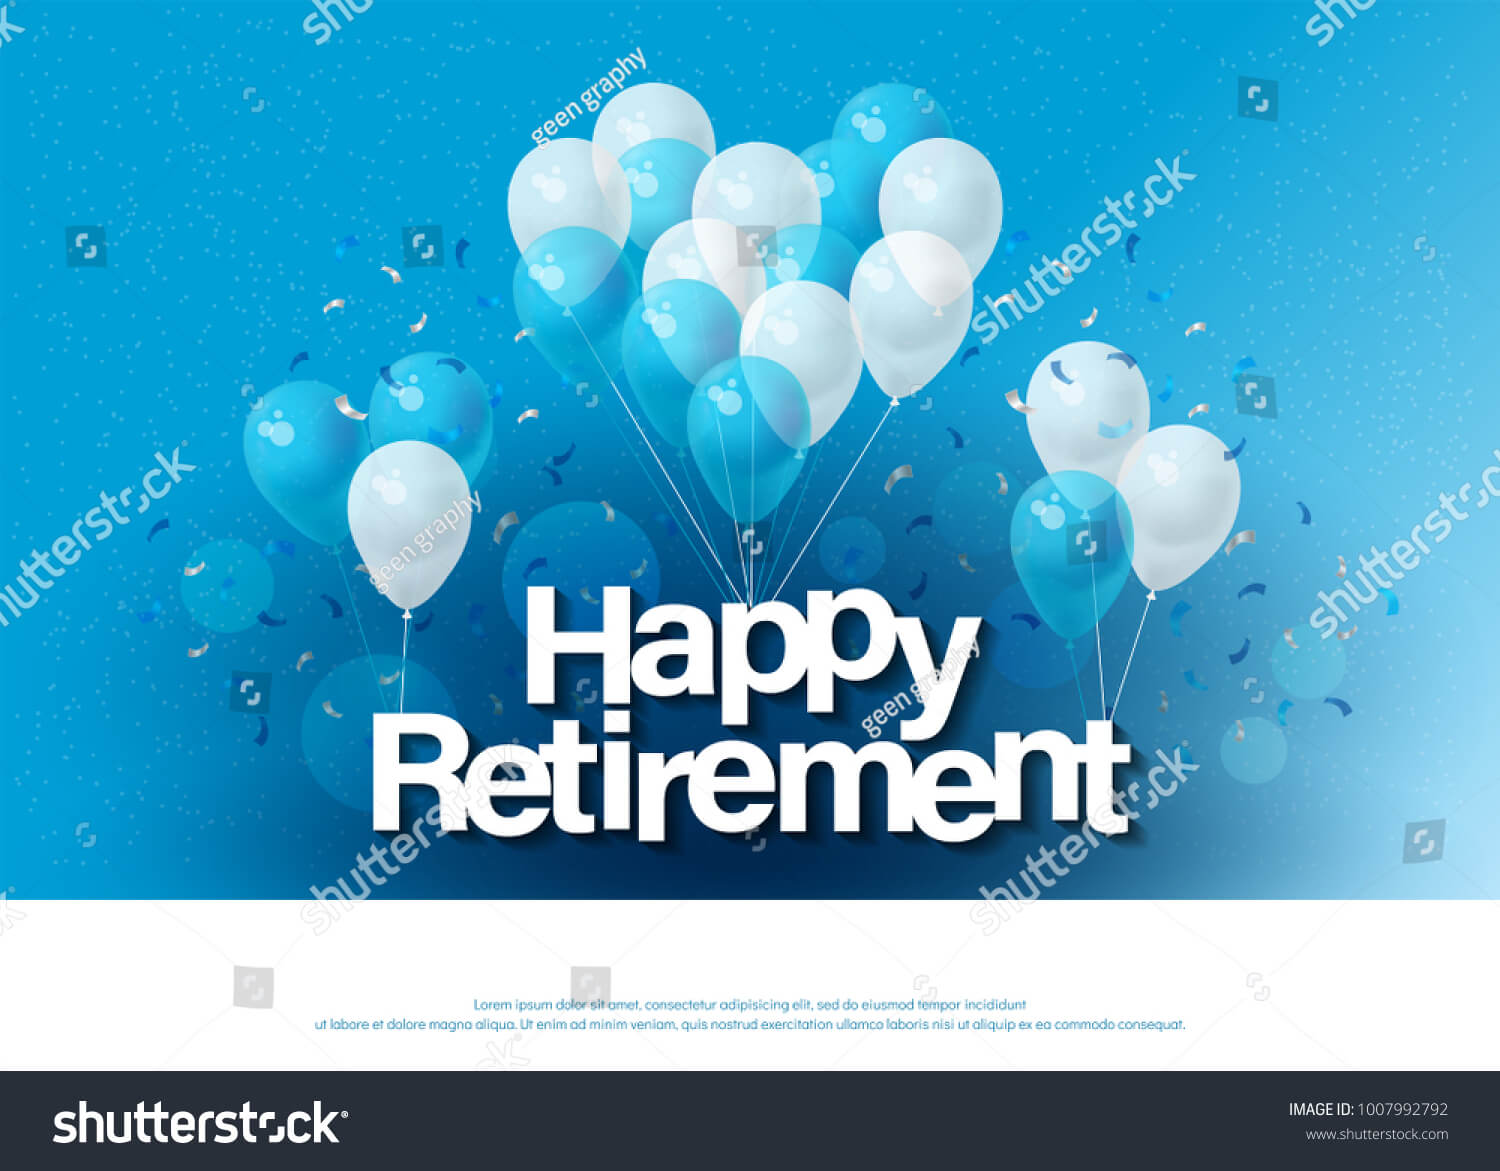 Happy Retirement Greeting Card Lettering Template Stock Intended For Retirement Card Template